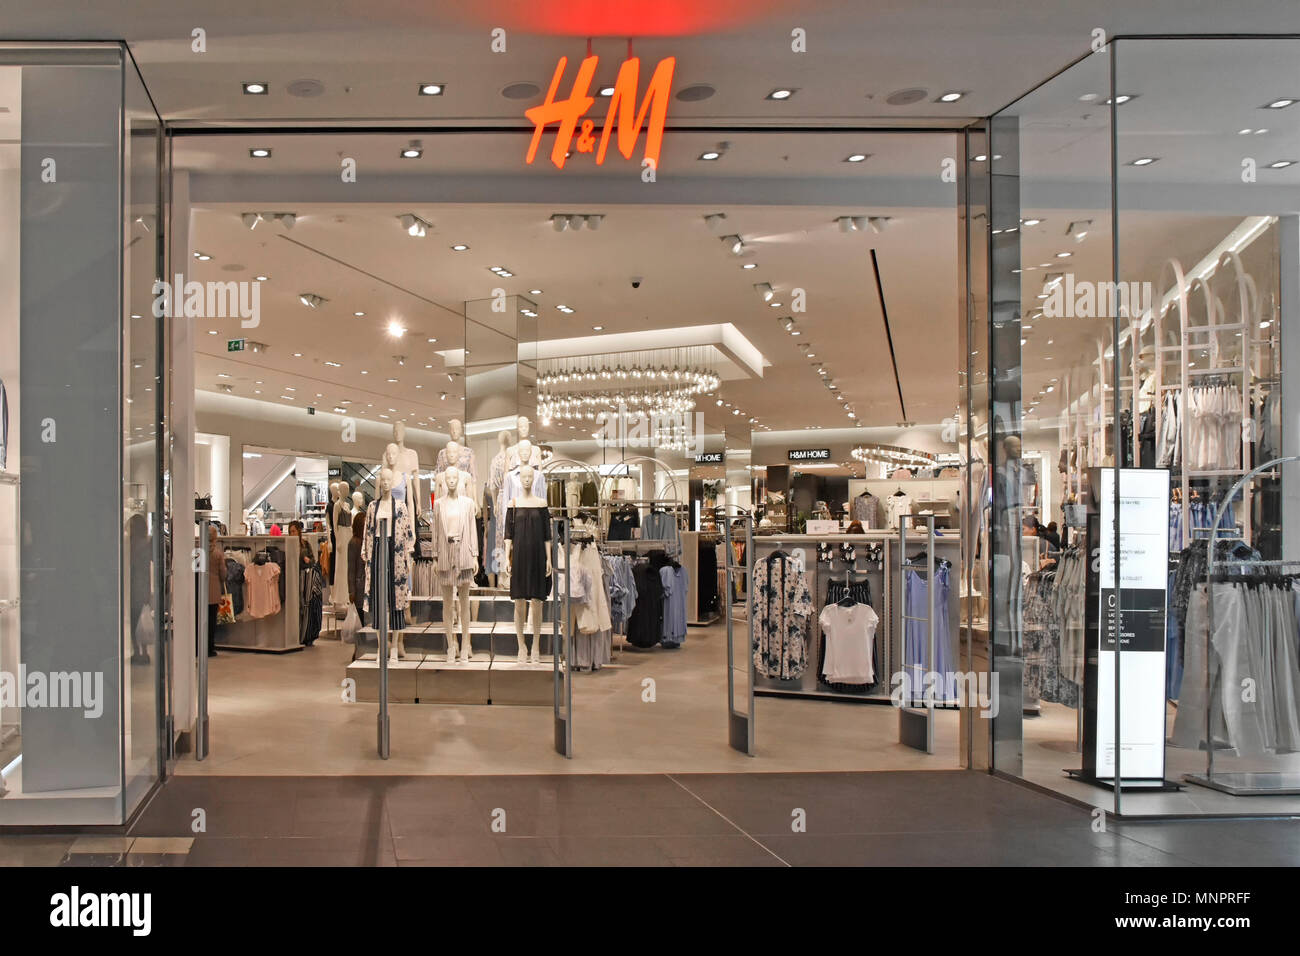 Shopping Mall early morning entrance & interior design of H&M clothing store mannequin displays & shoppers amongst racks Westfield Stratford London UK Stock Photo